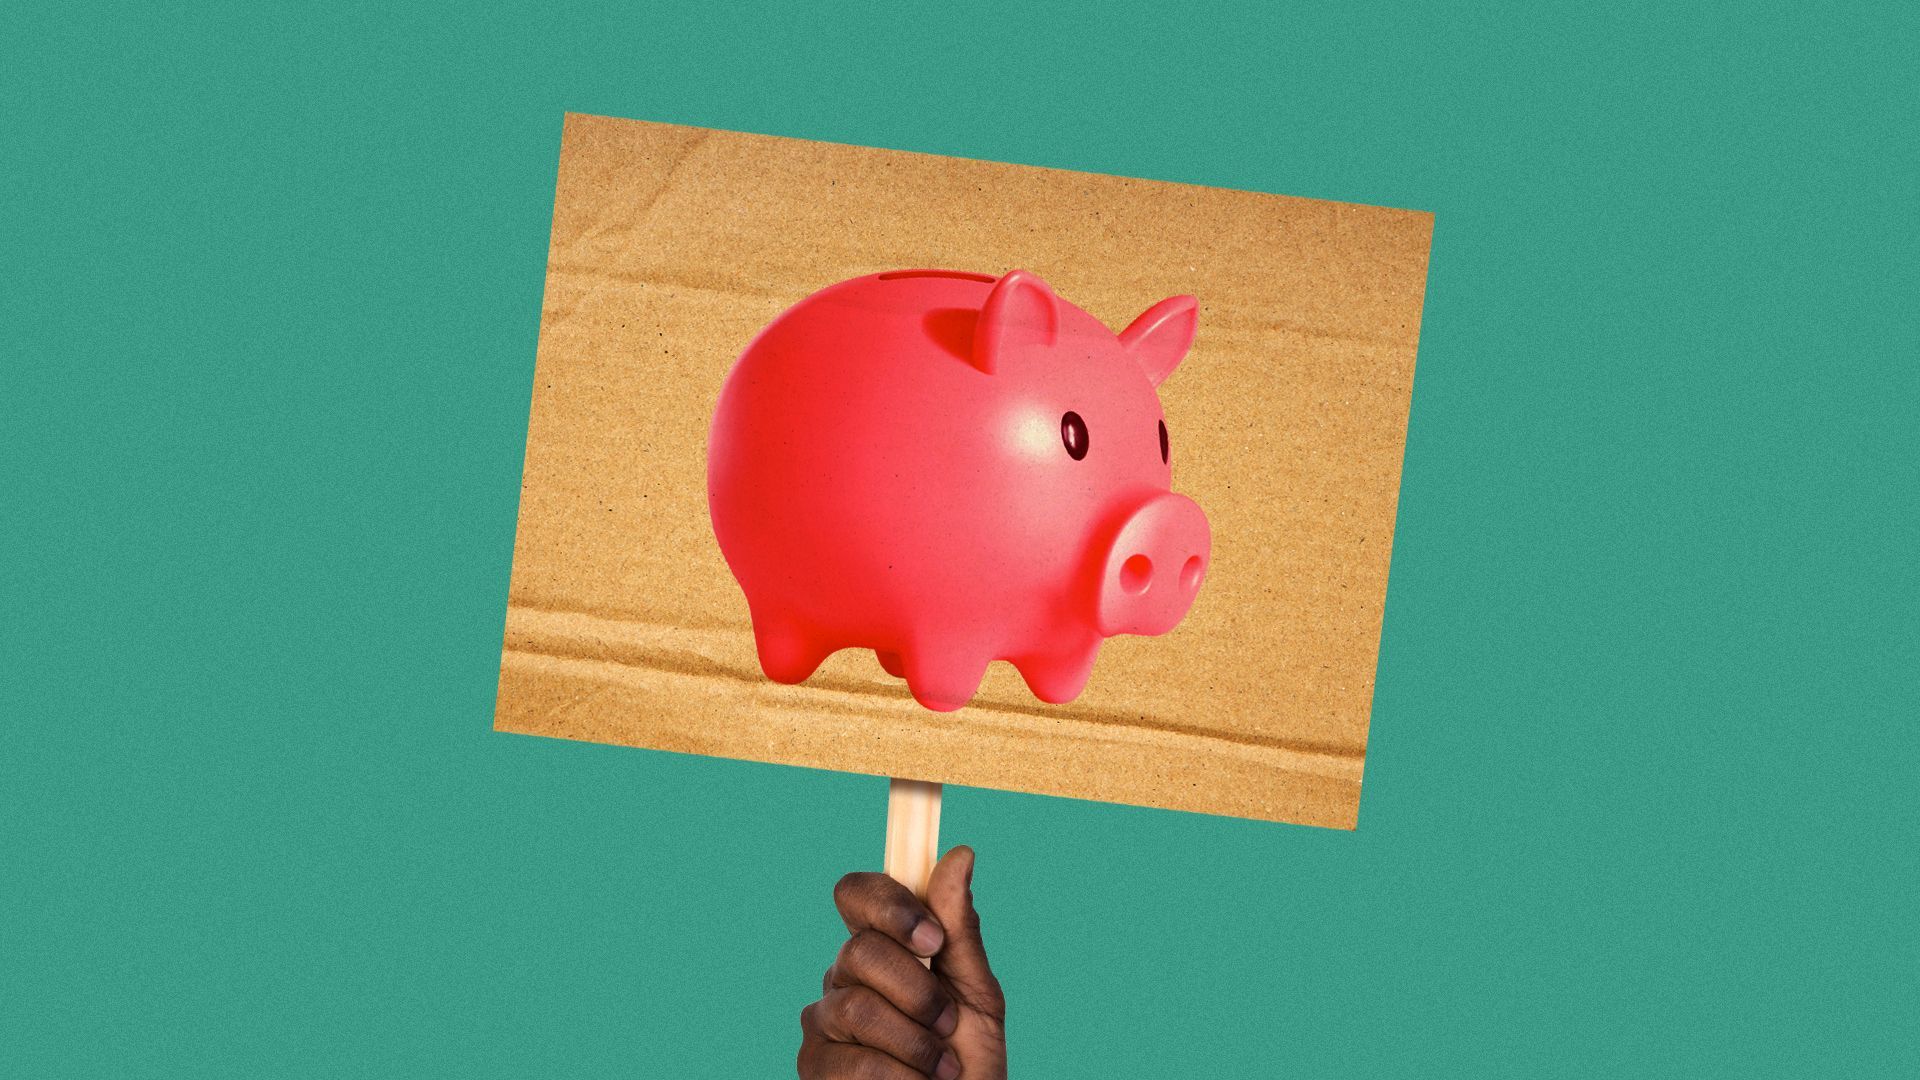 Illustration of a piggy bank on a protest sign.